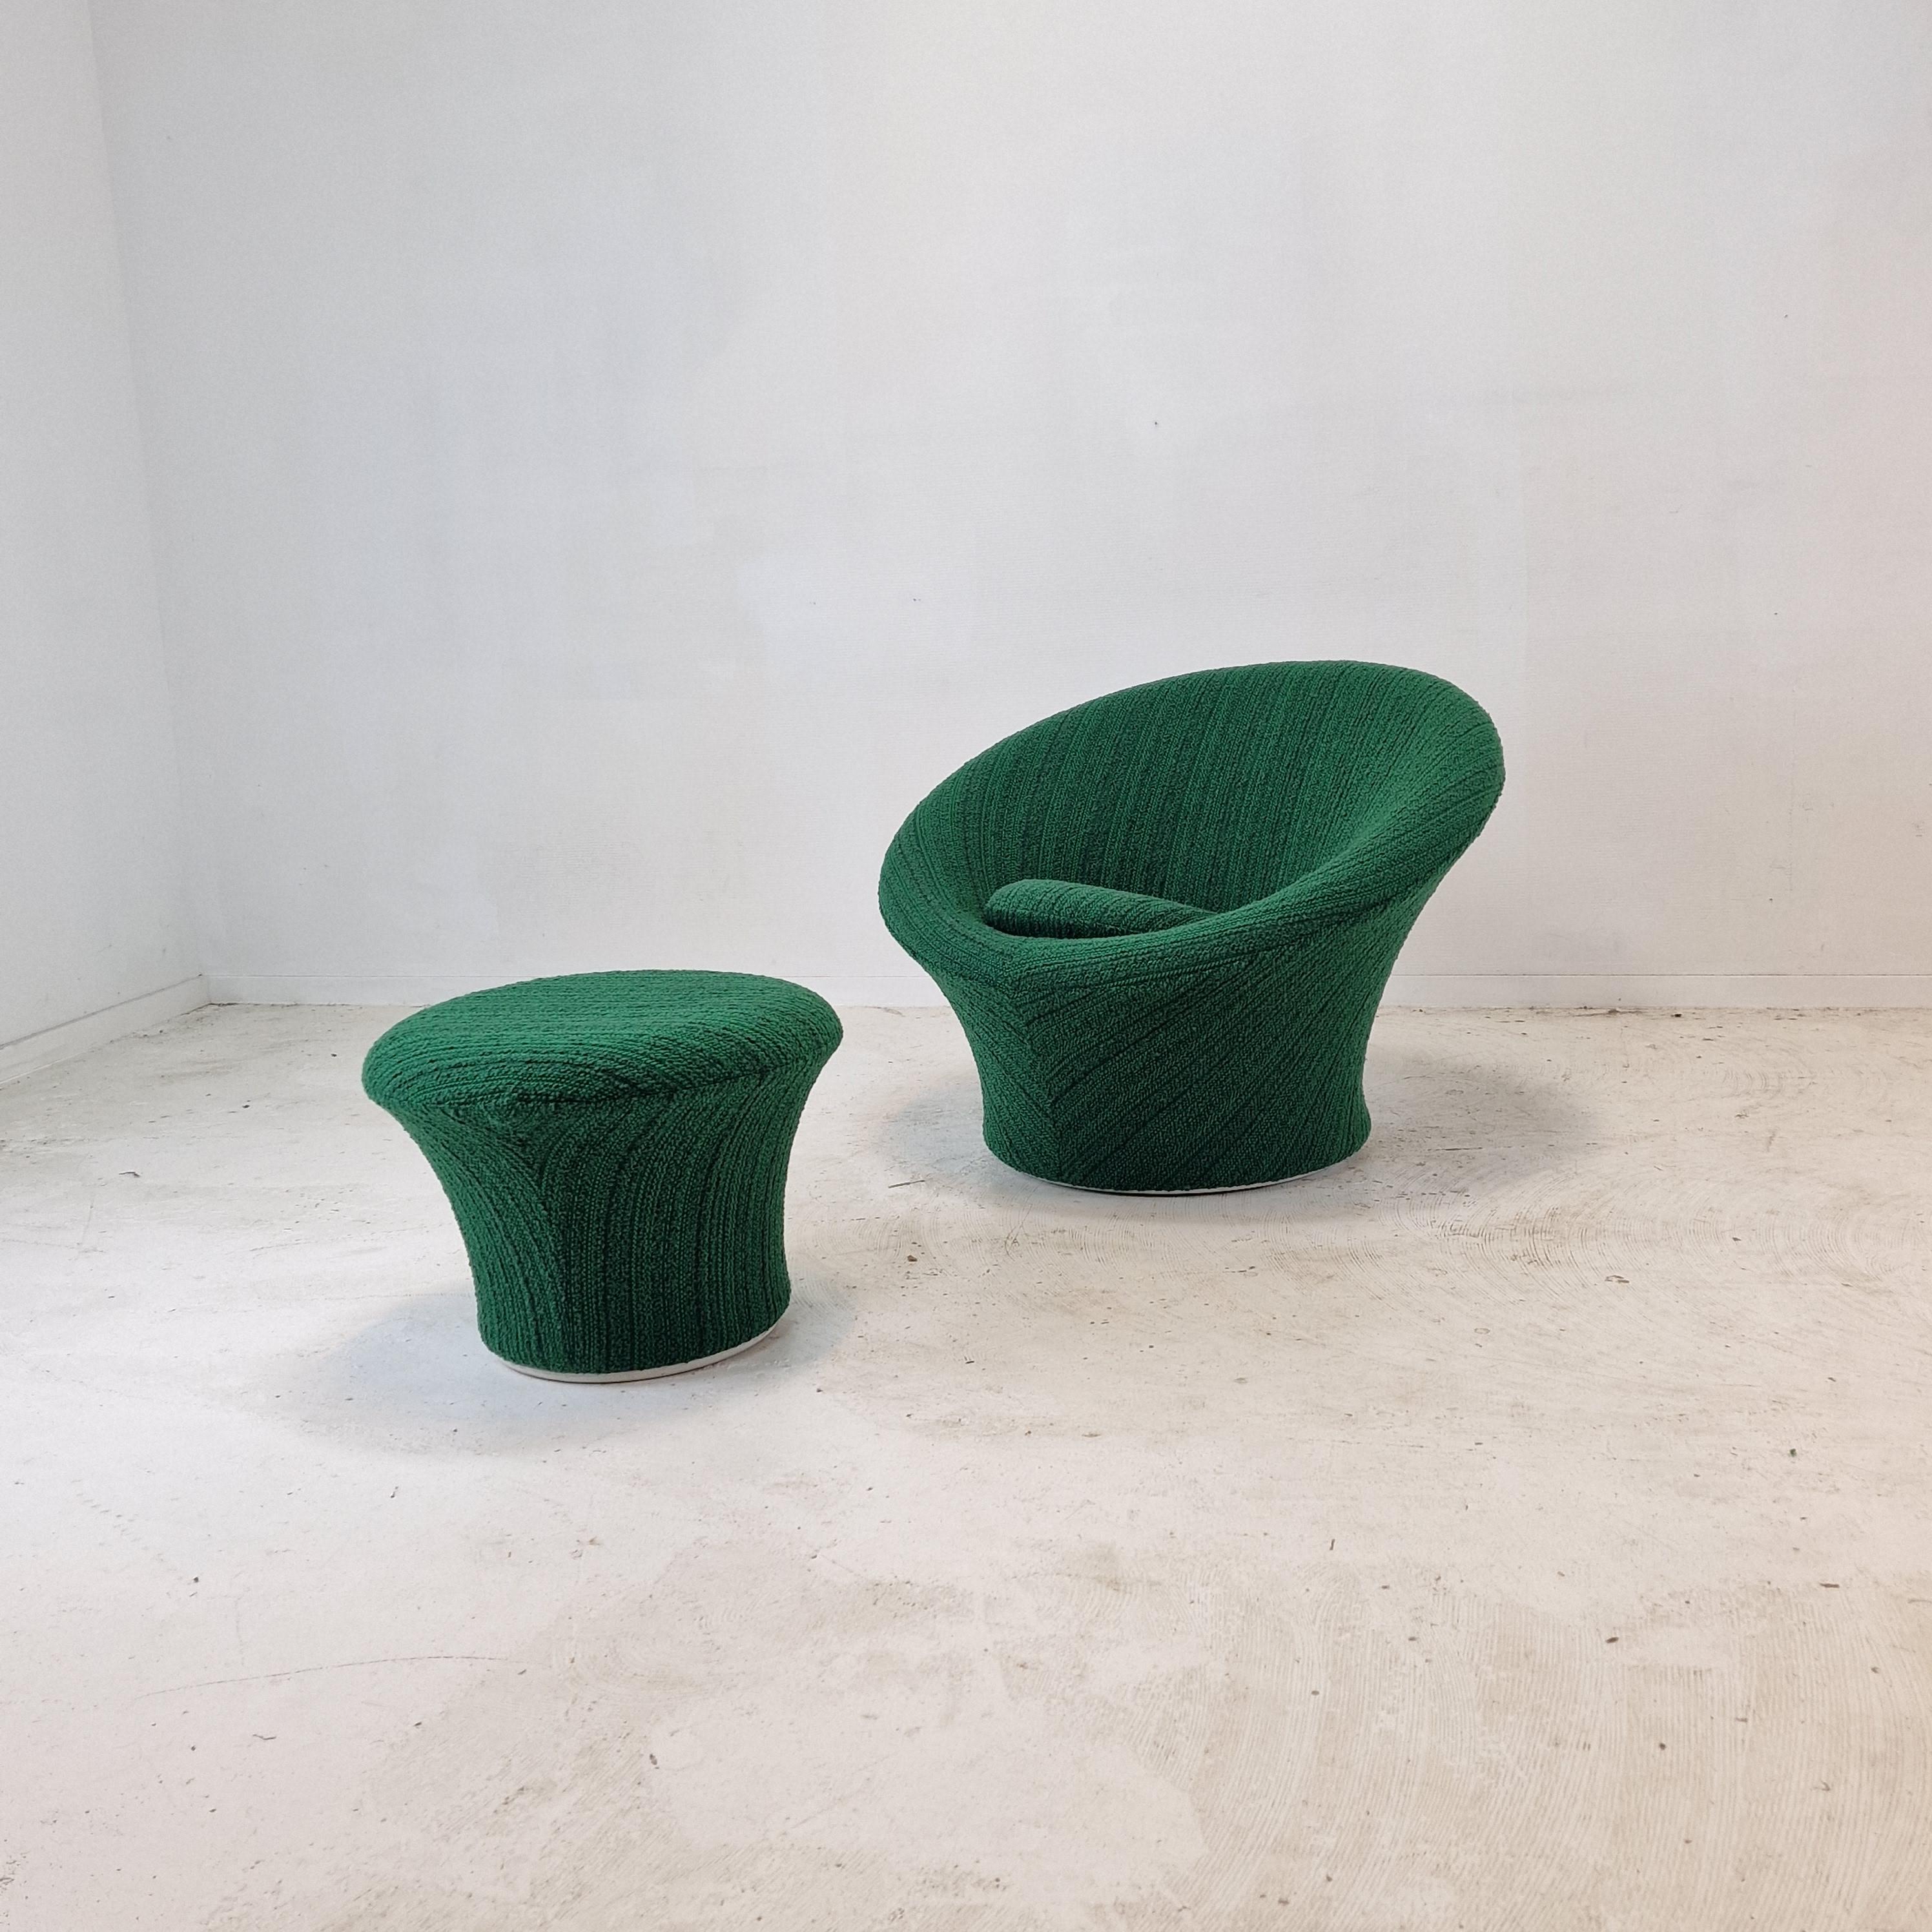 Stunning Mushroom set, designed by Pierre Paulin and fabricated by Artifort in the 60’s. 

The chair and the poof are completely restored with new fabric and new foam by a French Pierre Paulin specialist, they are in perfect condition.

The set is